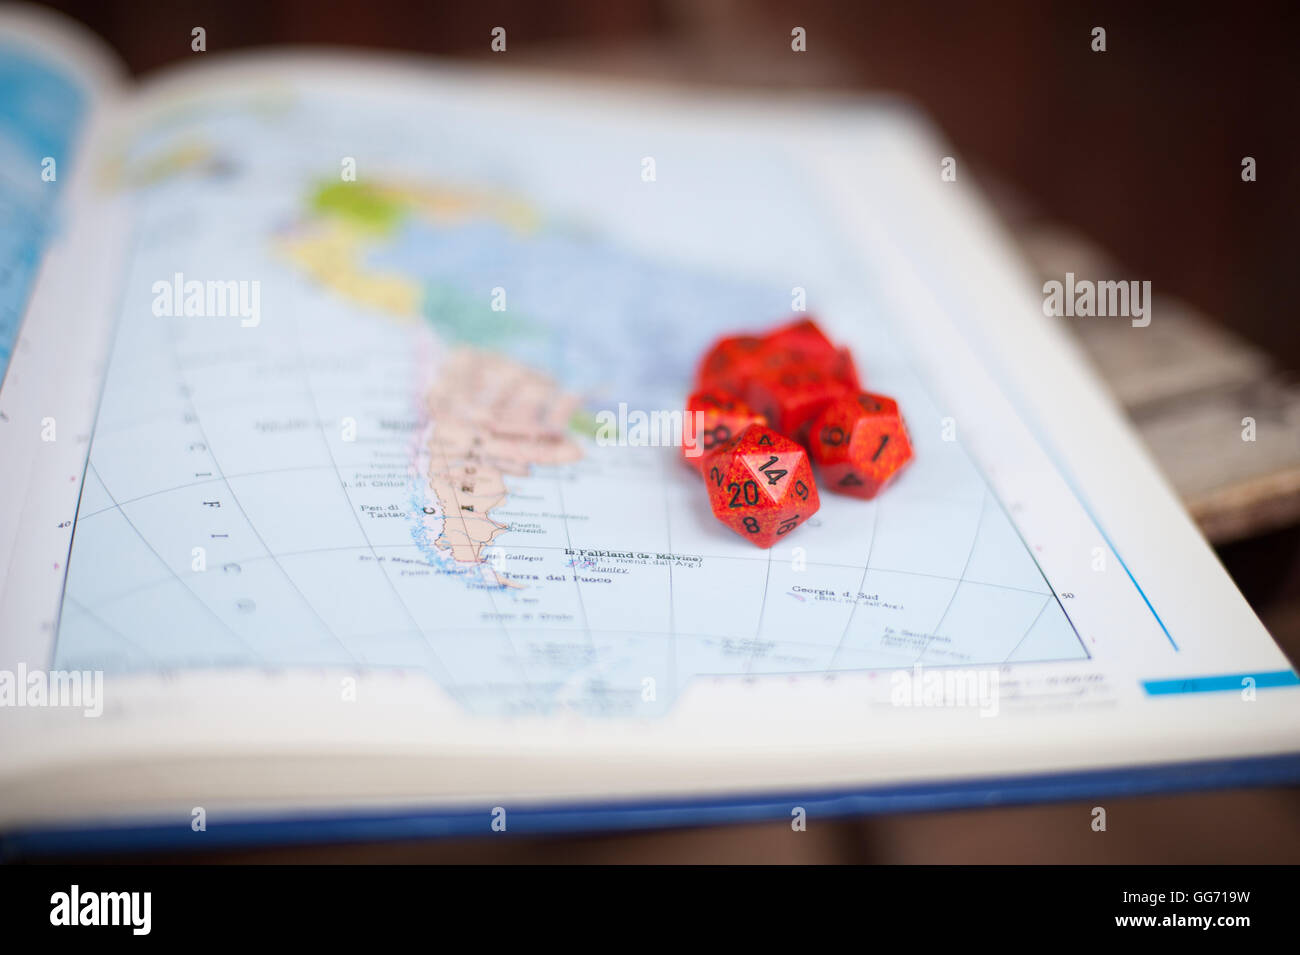 South America map with red special dice for war role playing game Stock Photo